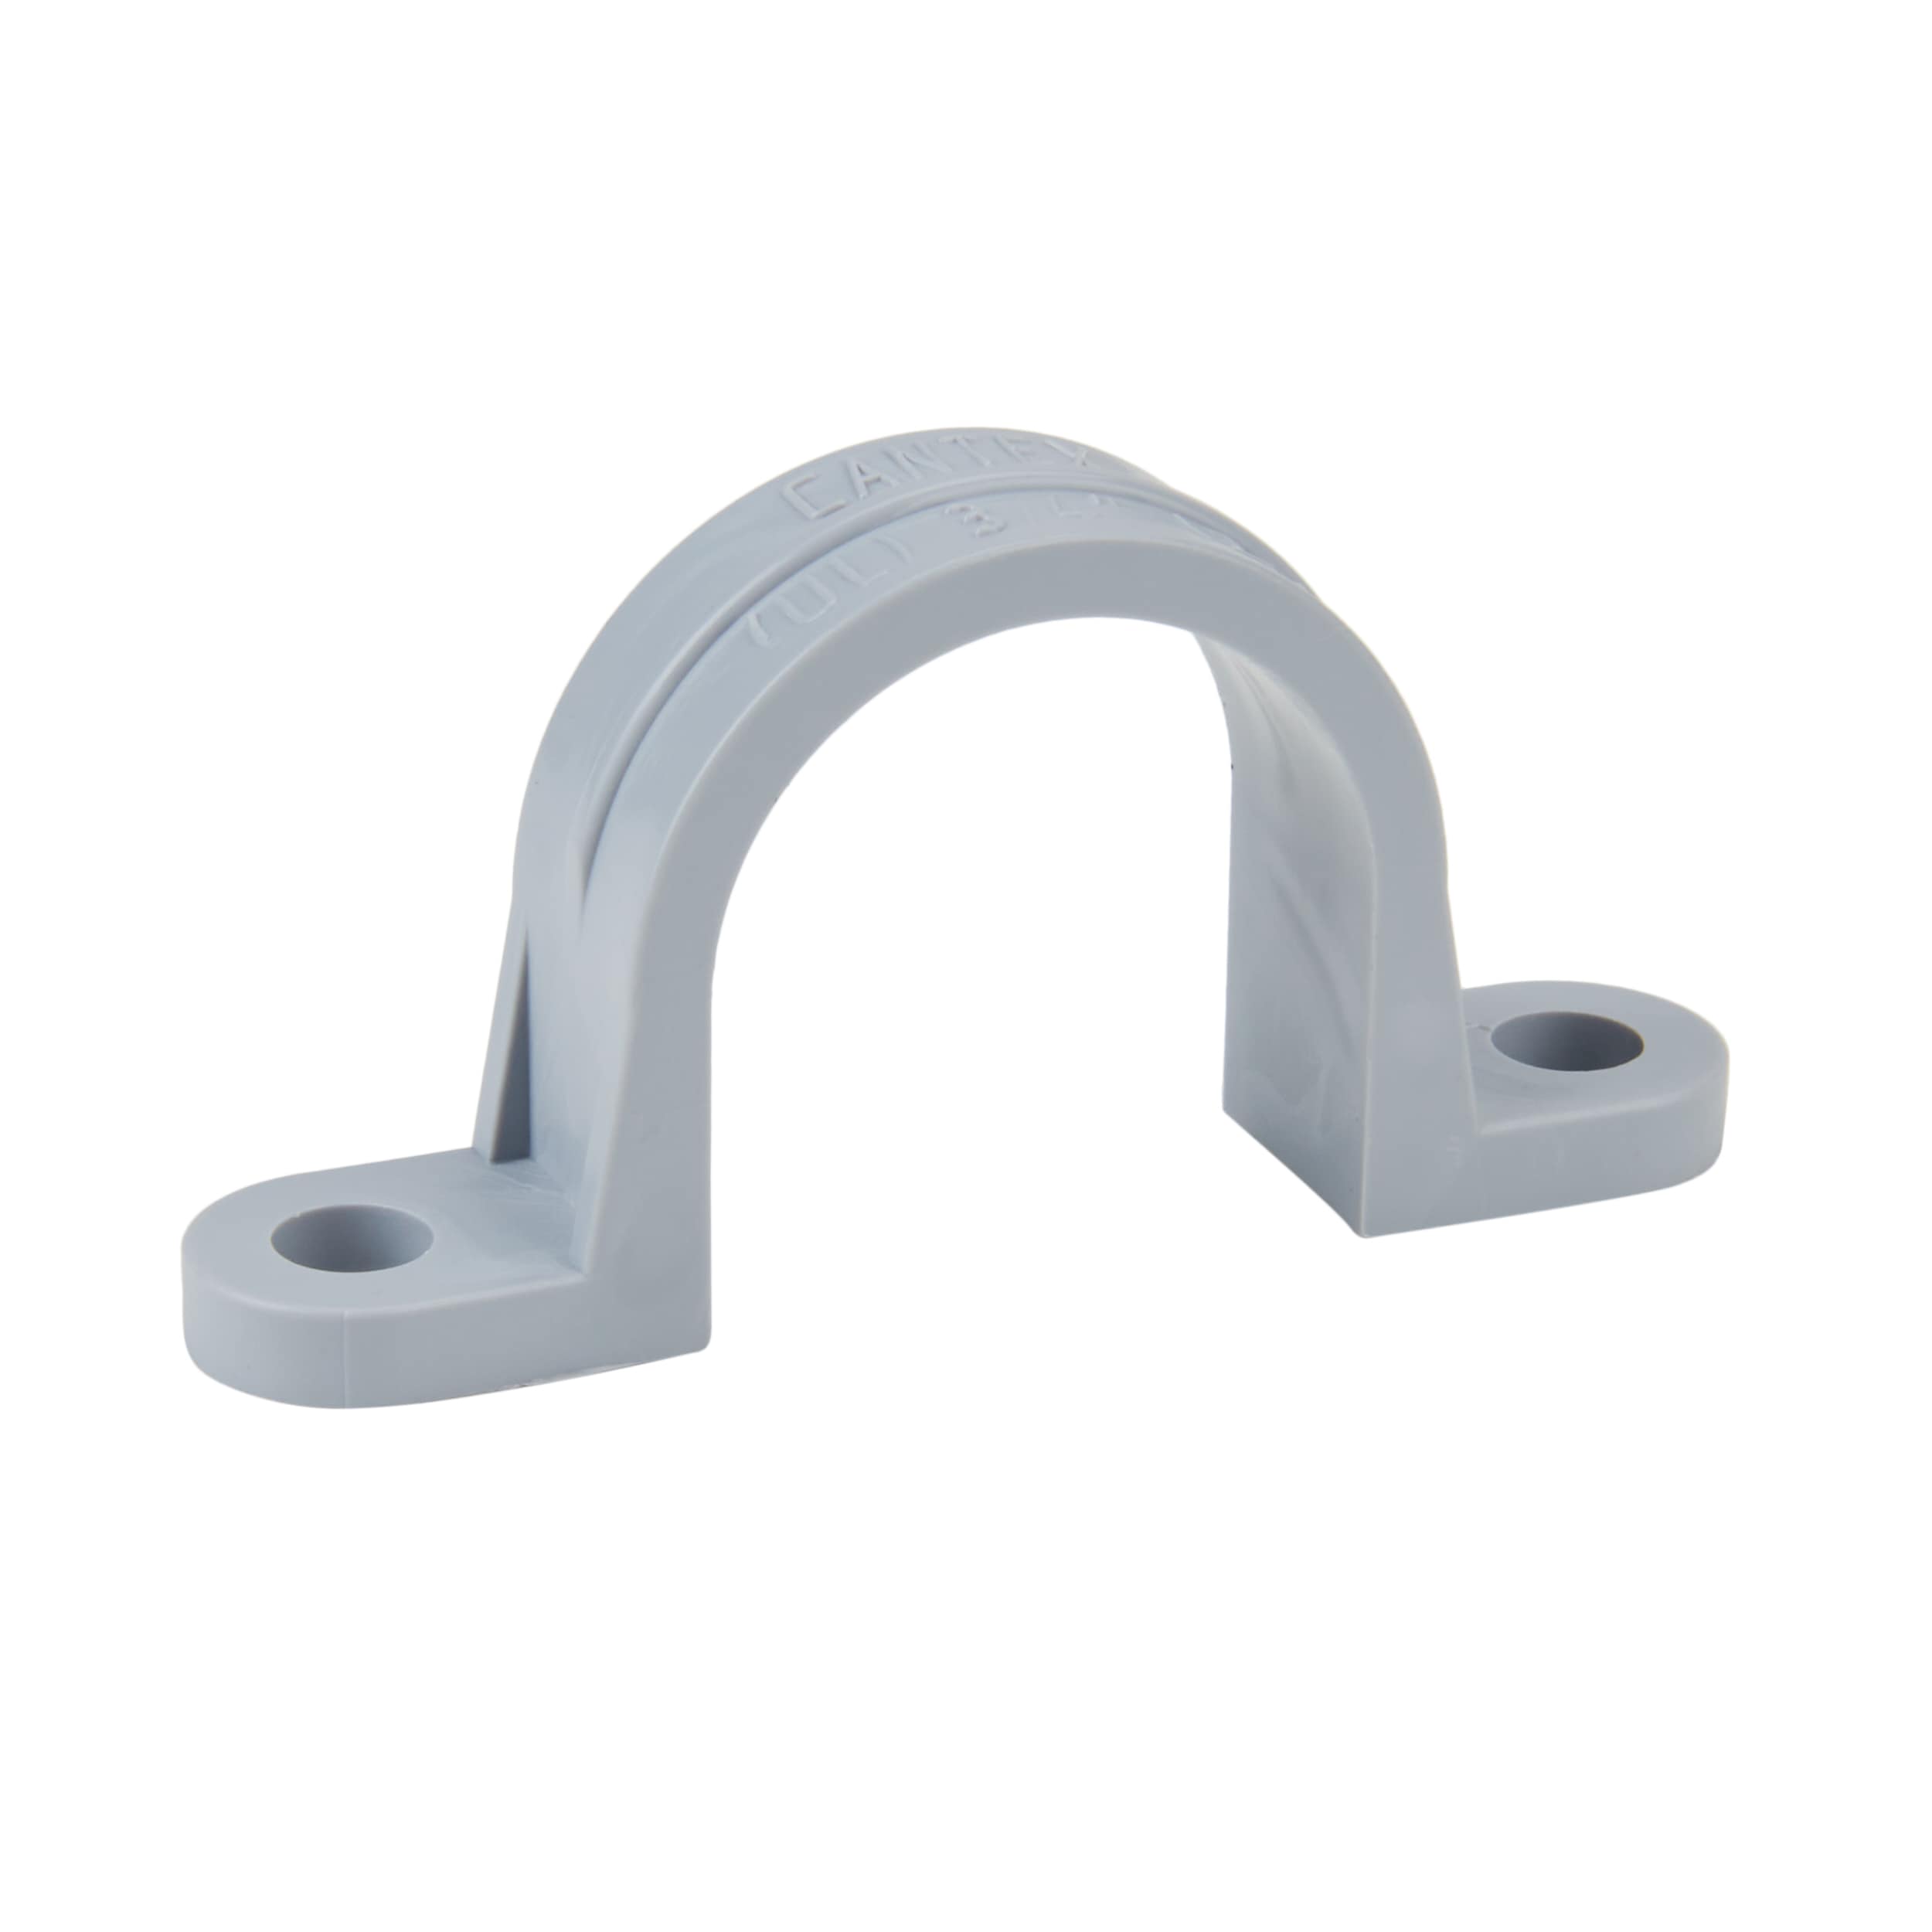 CANTEX 3/4-in Schedule 40 Schedule 80 Plastic Two-hole Clamp Conduit ...